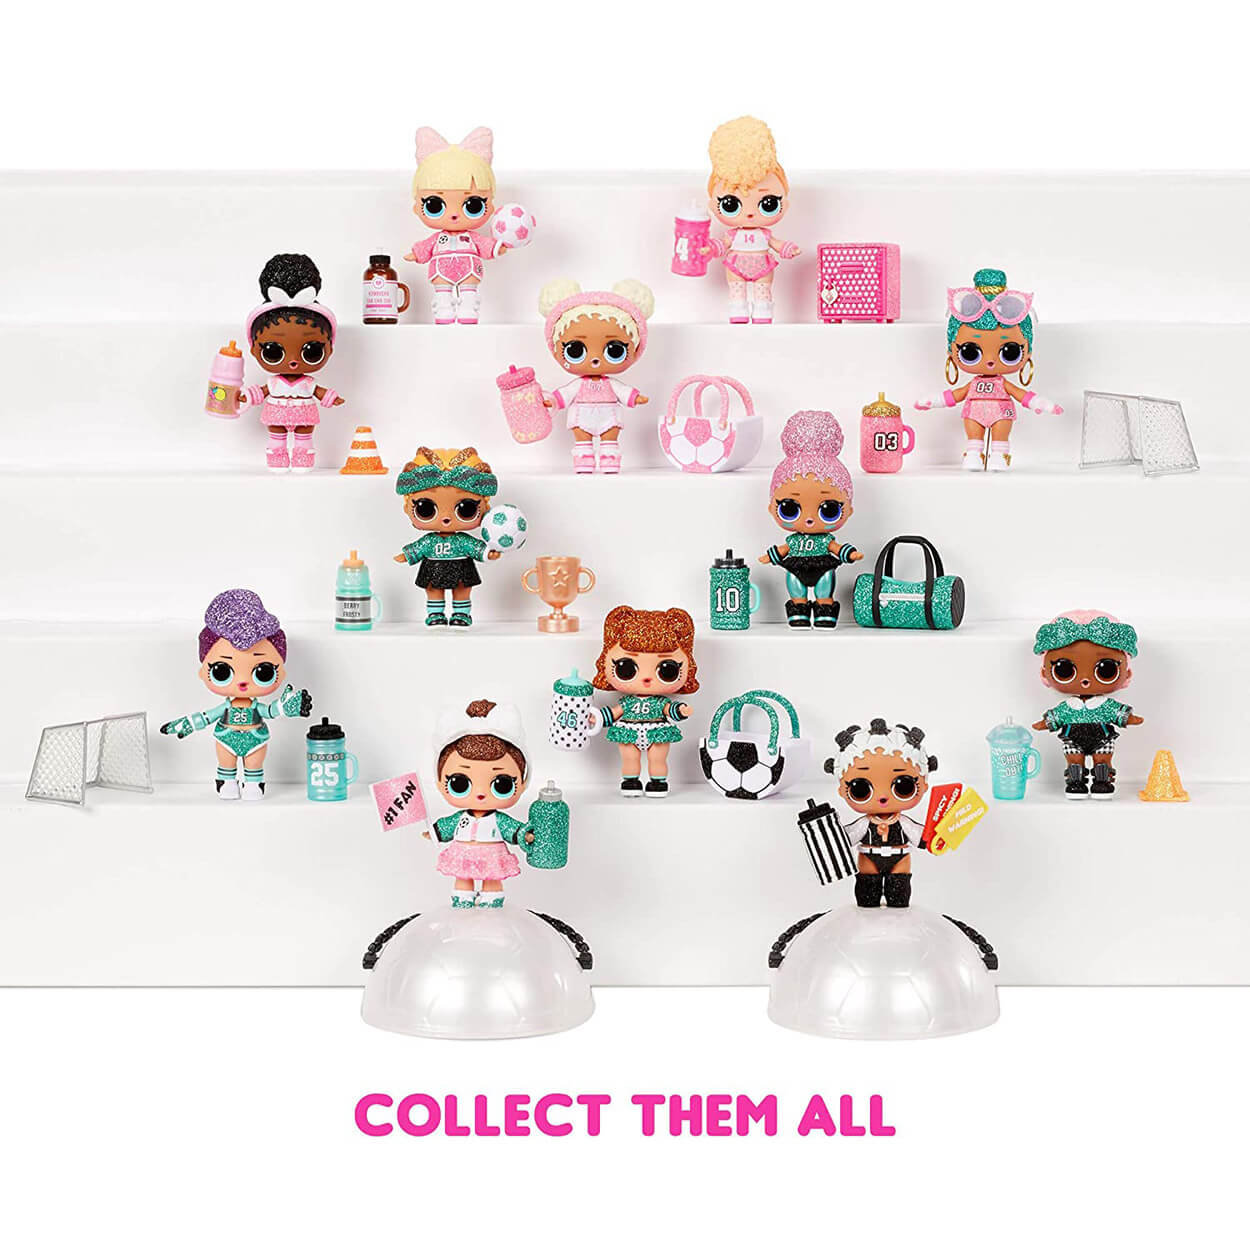 L.O.L. Surprise! All-Star B.B.s Series 3 Soccer Team Sparkly Doll with 8 Surprises